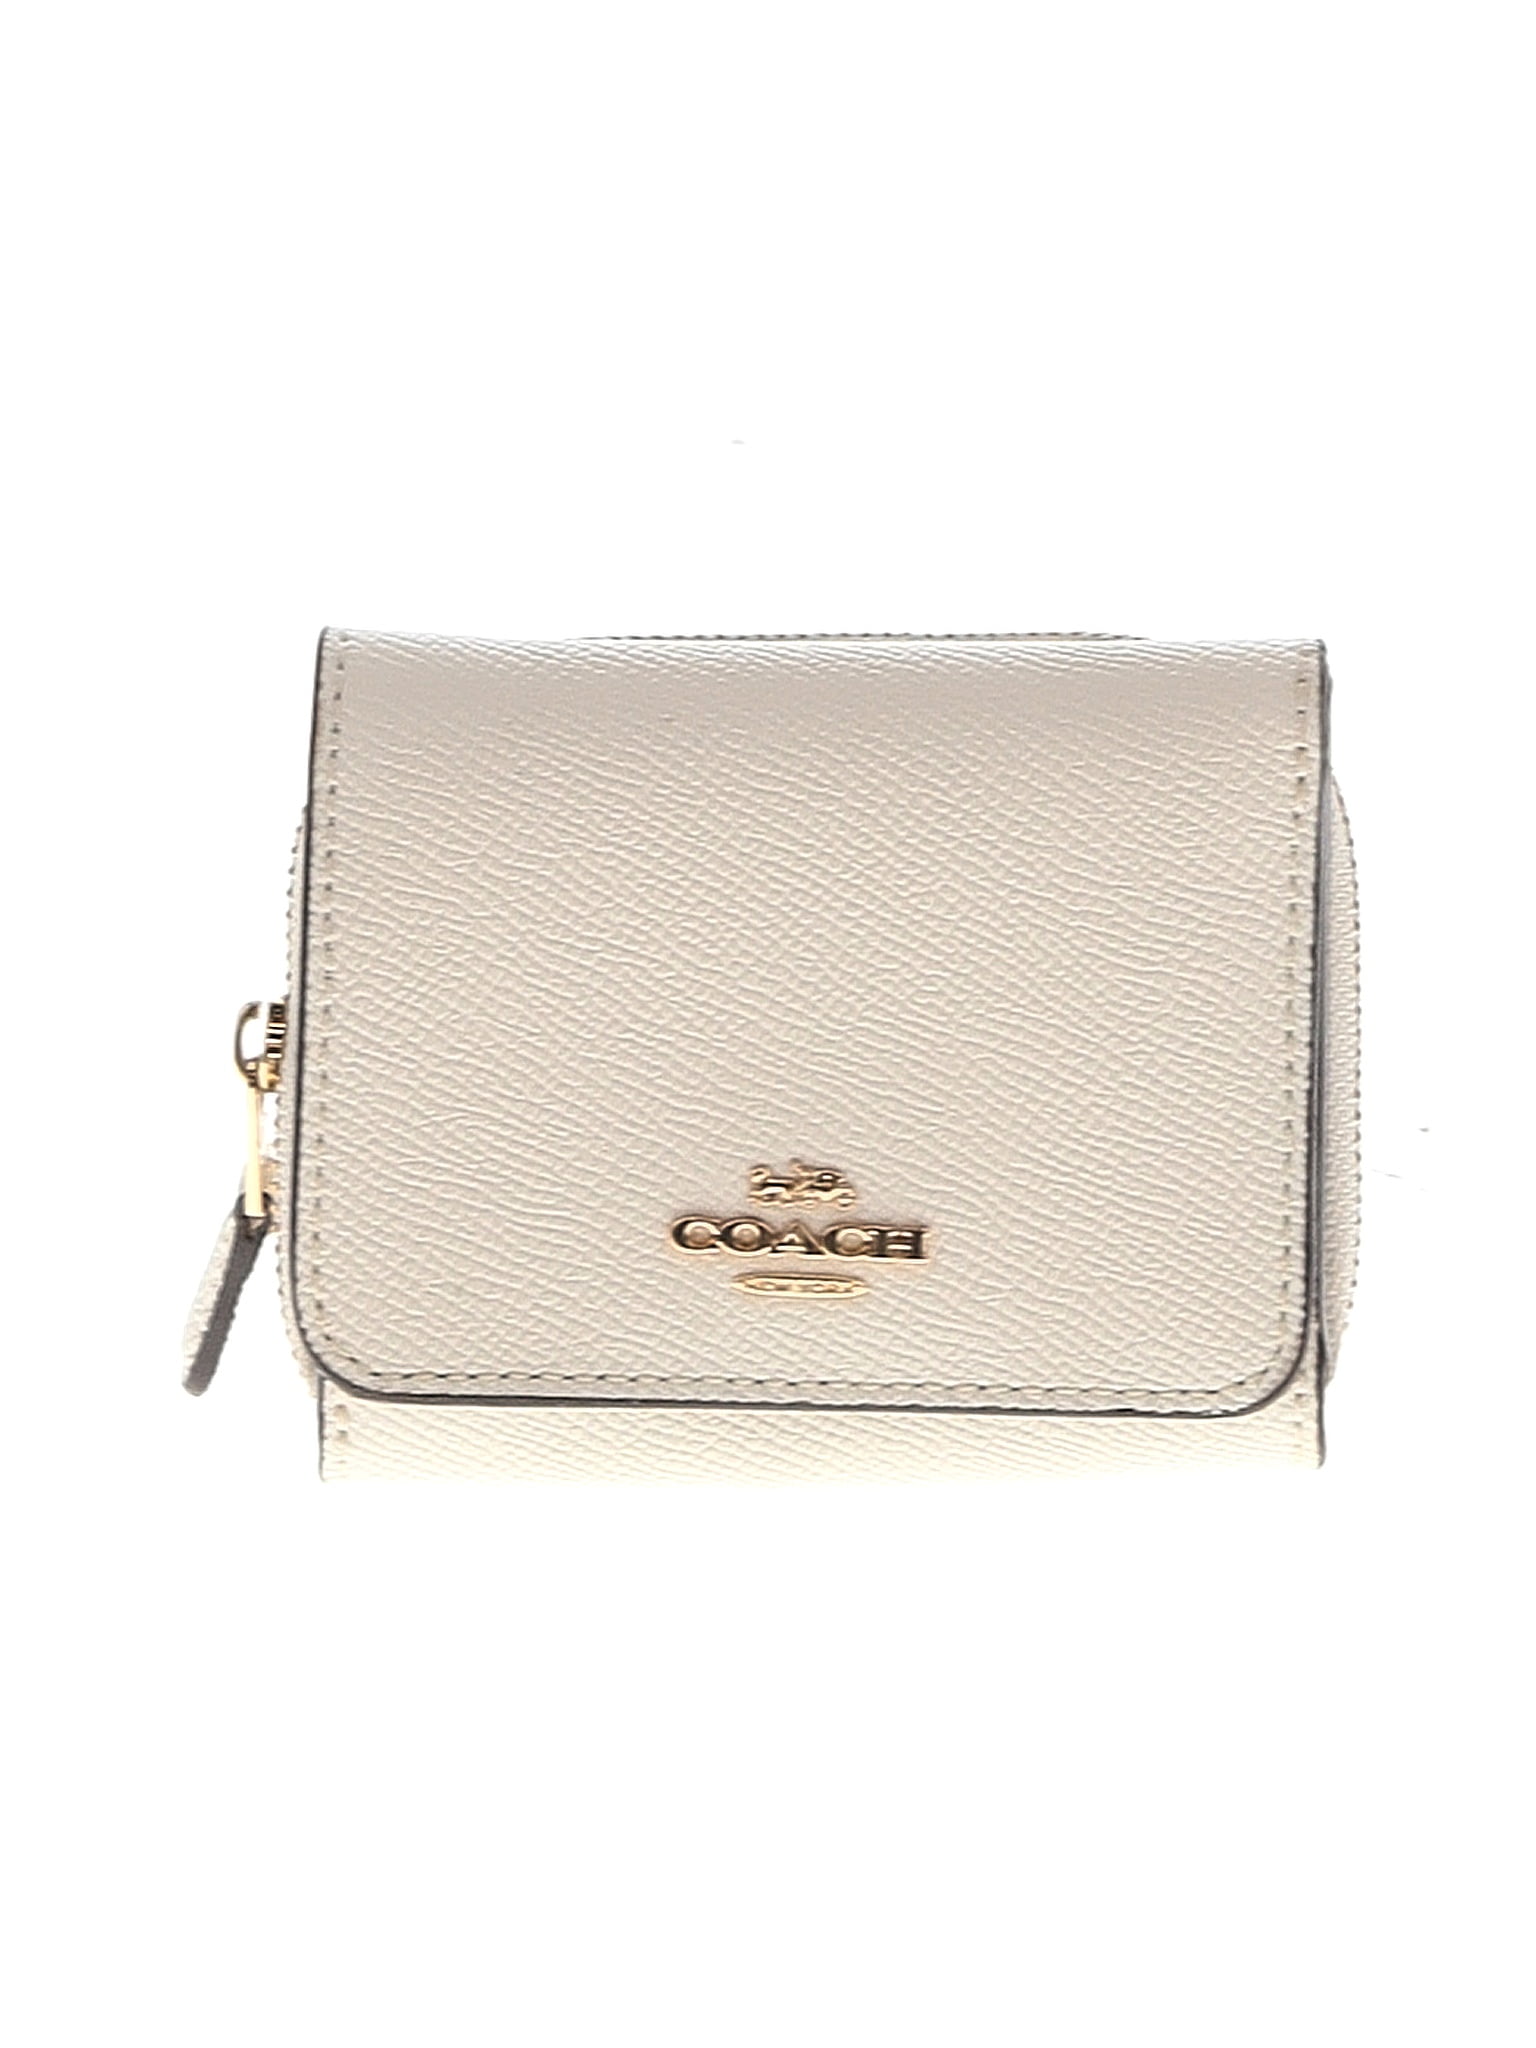 Coach 100% Leather Ivory Leather Wallet One Size - 72% off | ThredUp